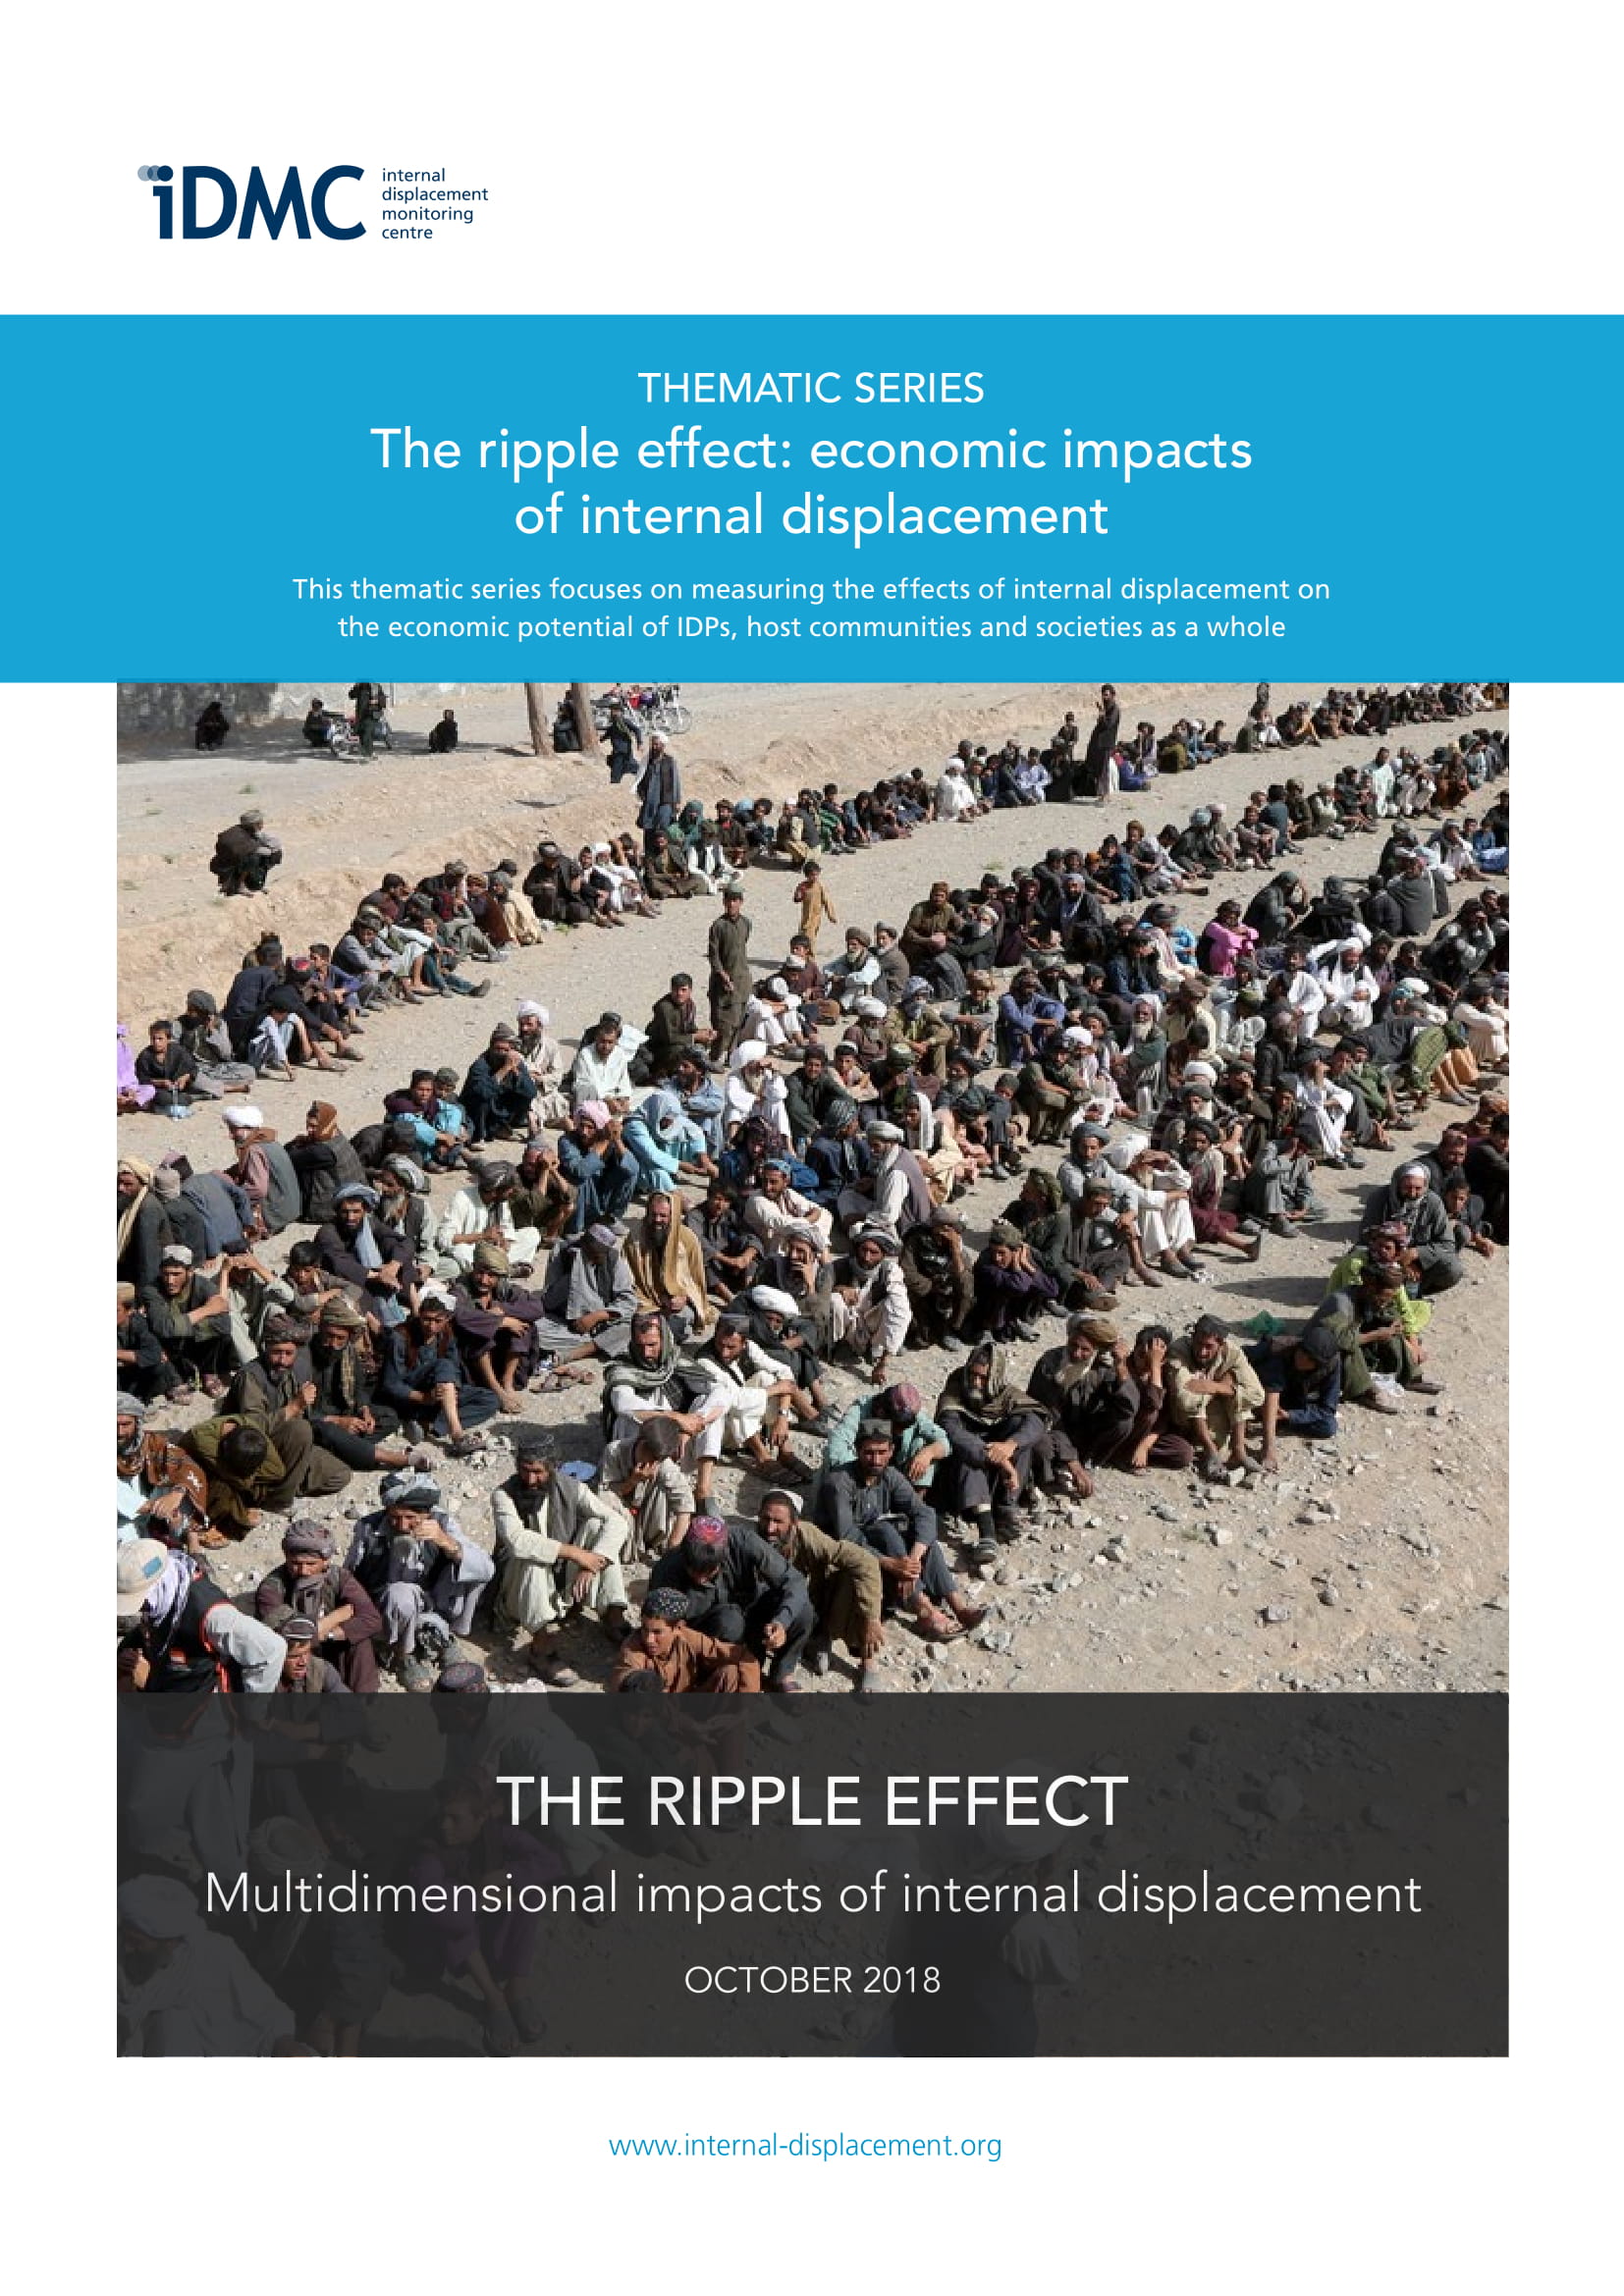 Multidimensional impacts of internal displacement 